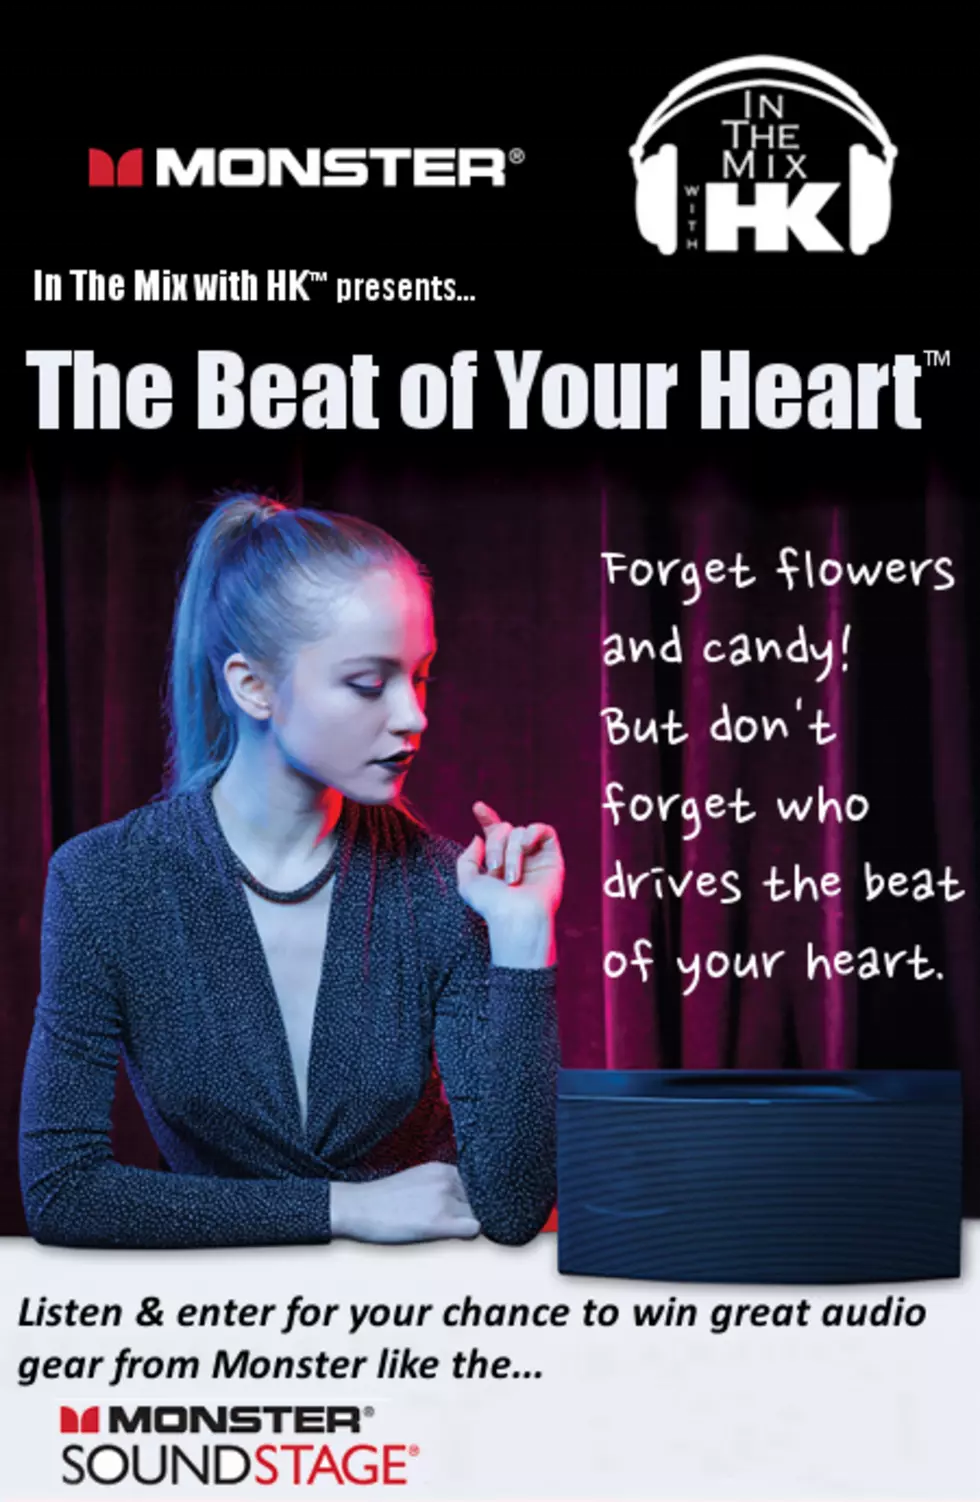 HK’s GOT THE BEAT OF YOUR HEART… A VALENTINE’S DAY GIVEAWAY!